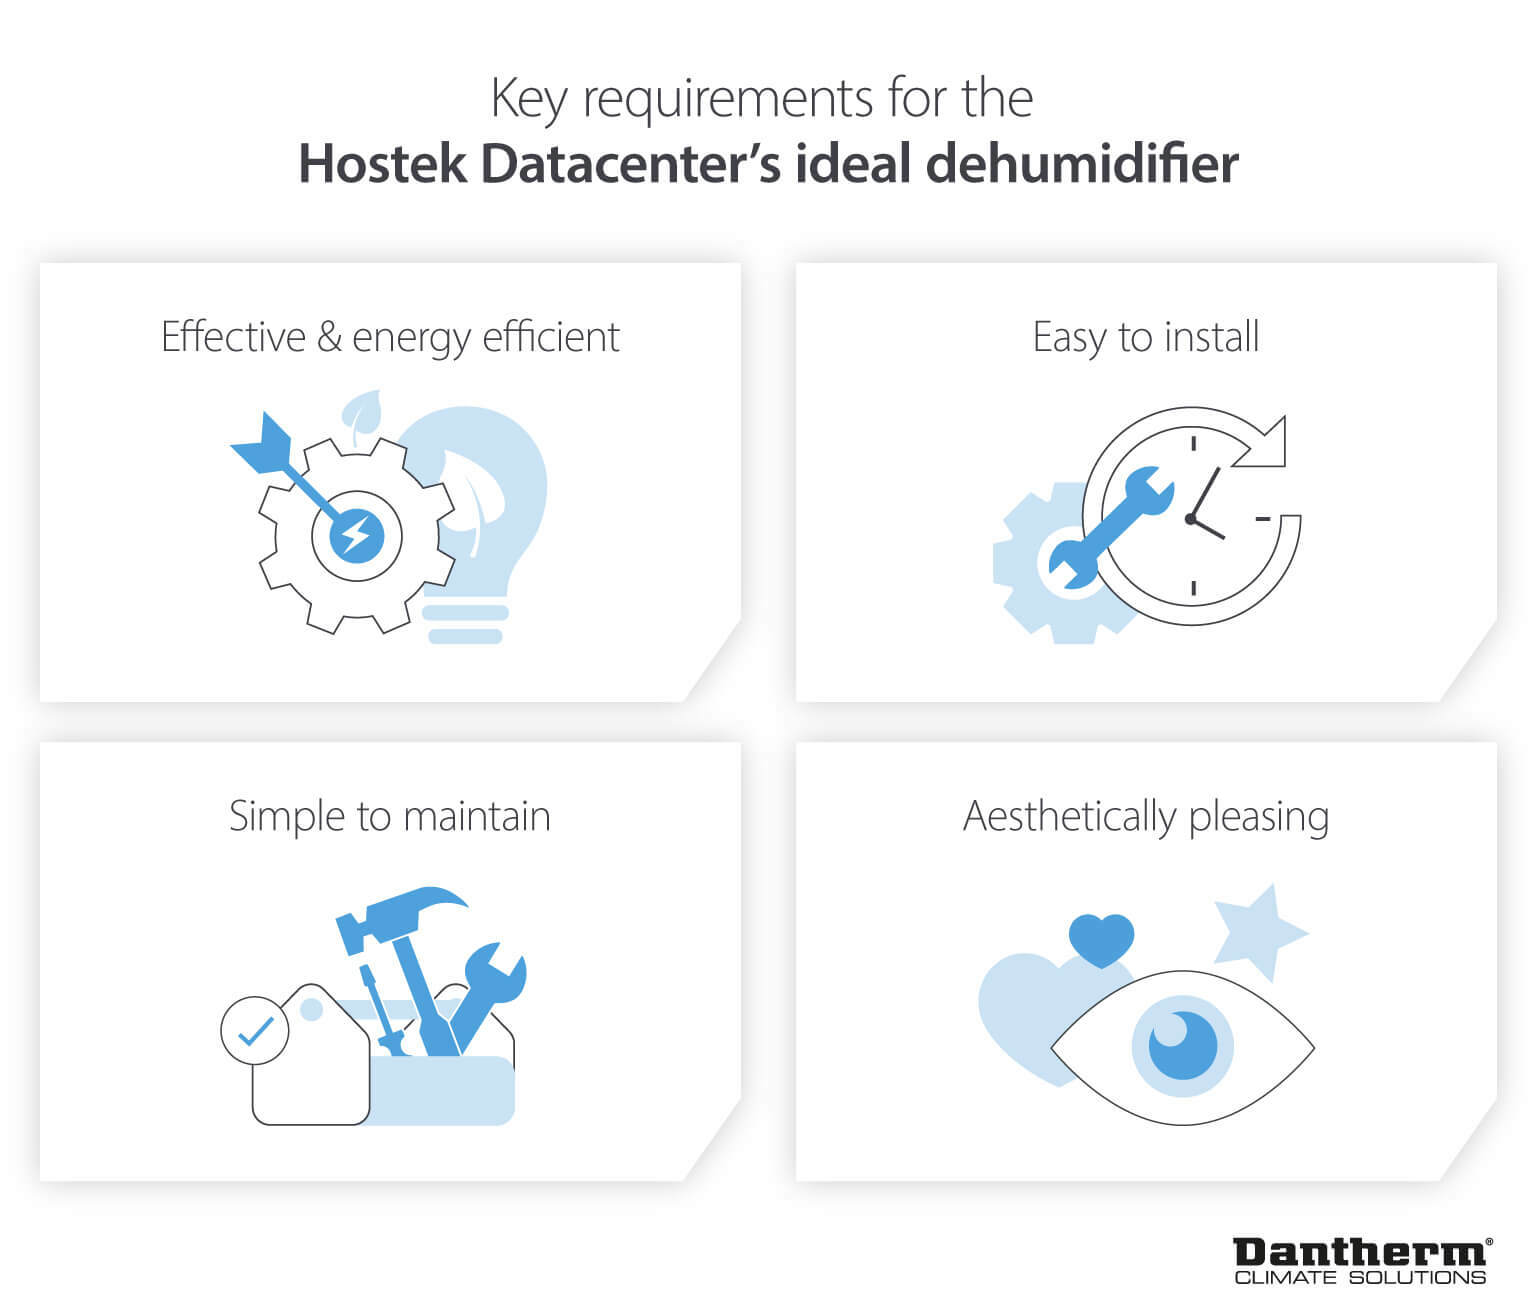 Hostek Datacenter dehumidifier requirements for installation and performance - Infographic